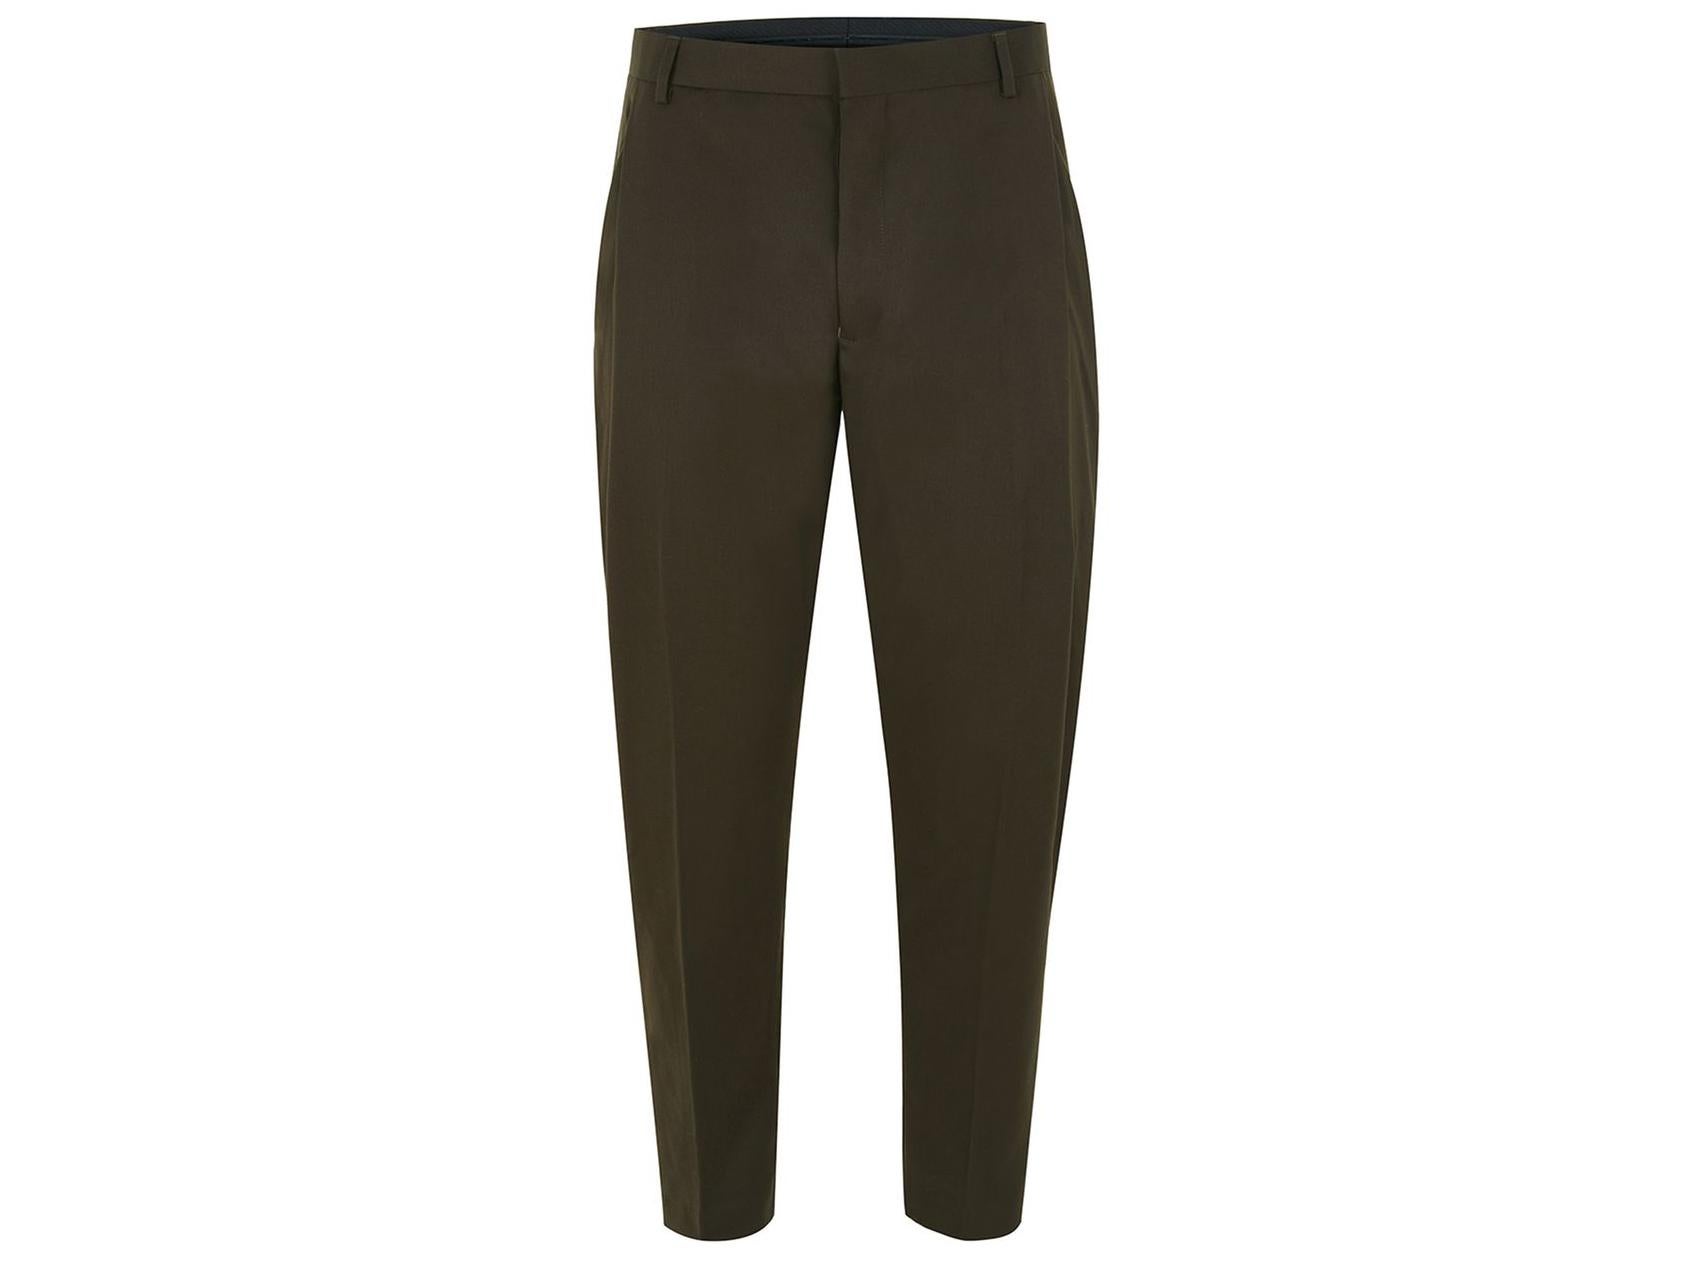 Olive green smart tapered trousers, £35, Topman